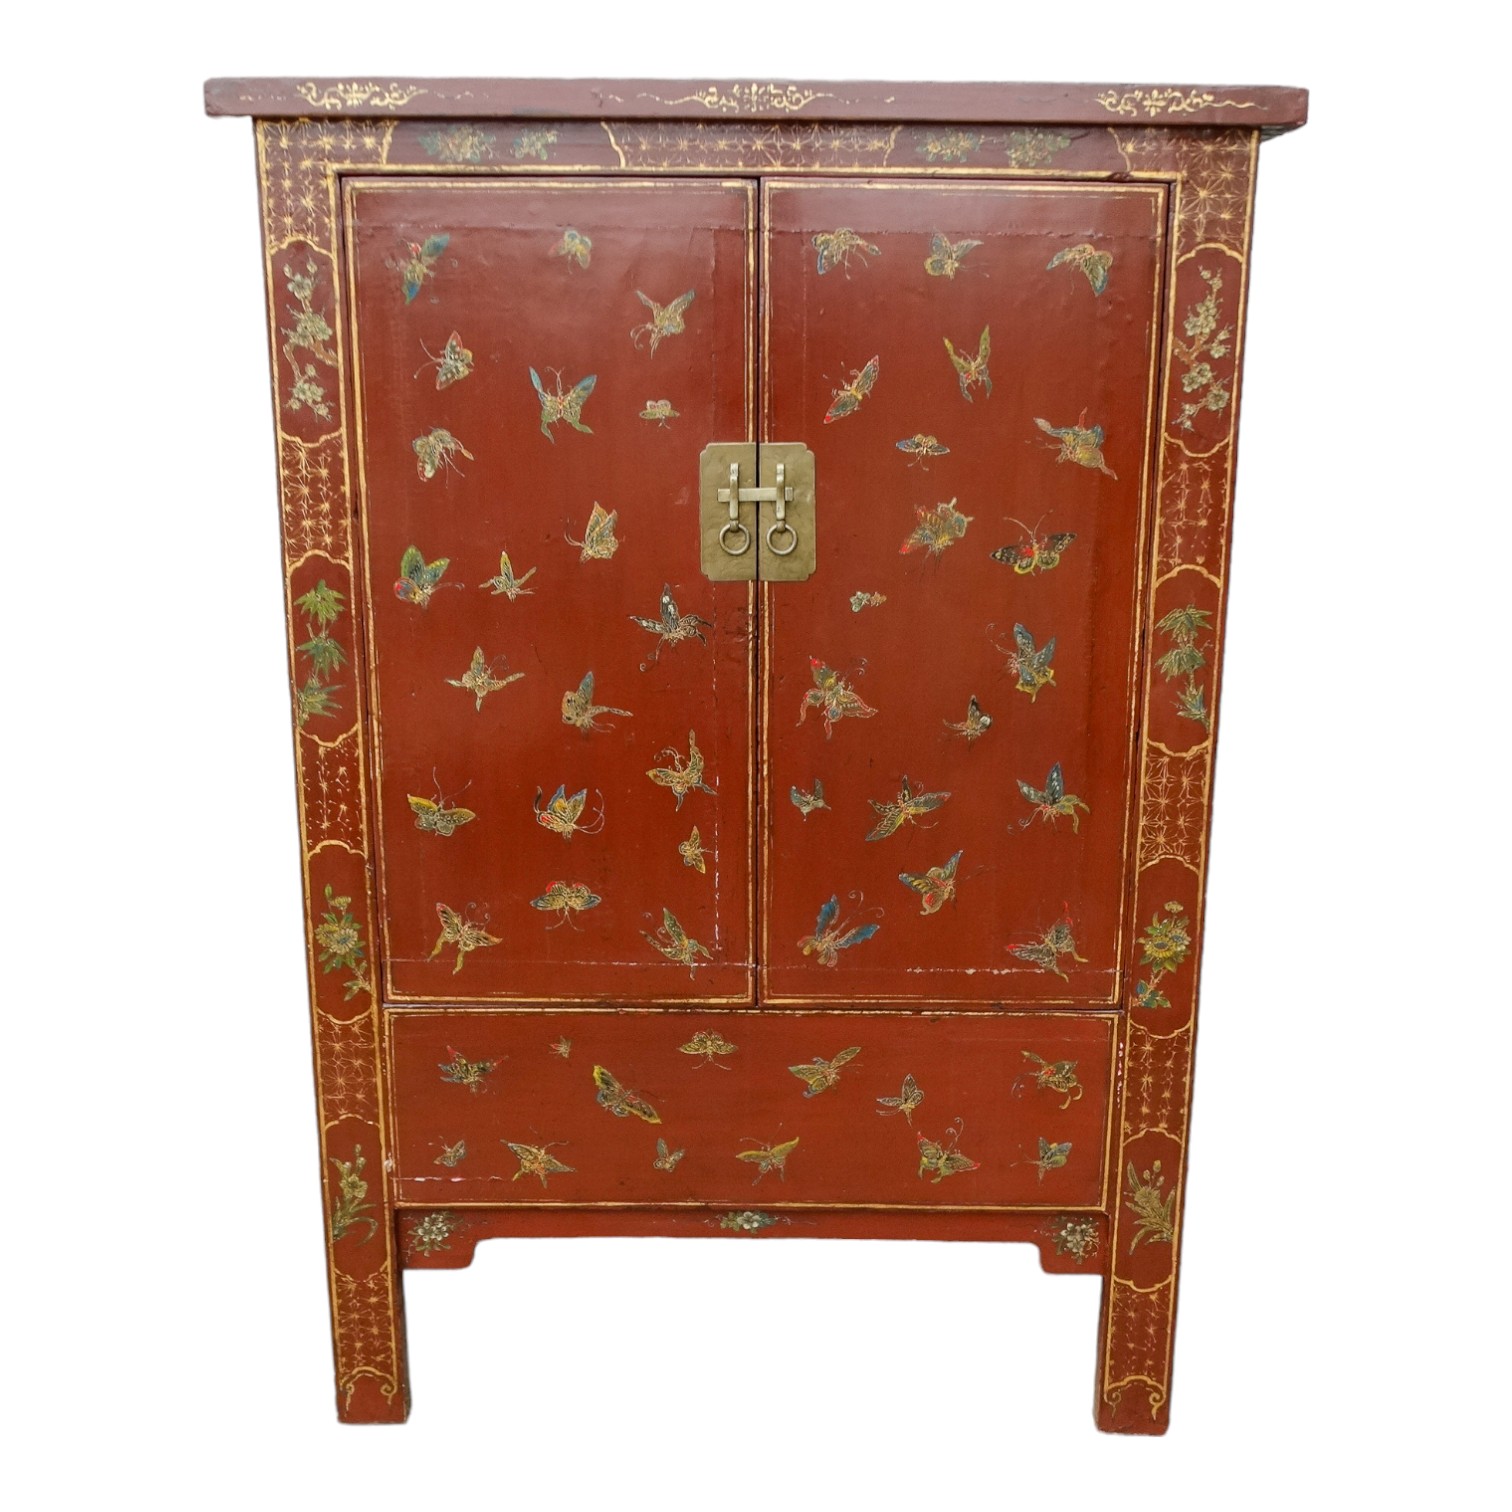 A 19th century Chinese lacquered cabinet - decorated with butterflies and cherry blossom, the pair